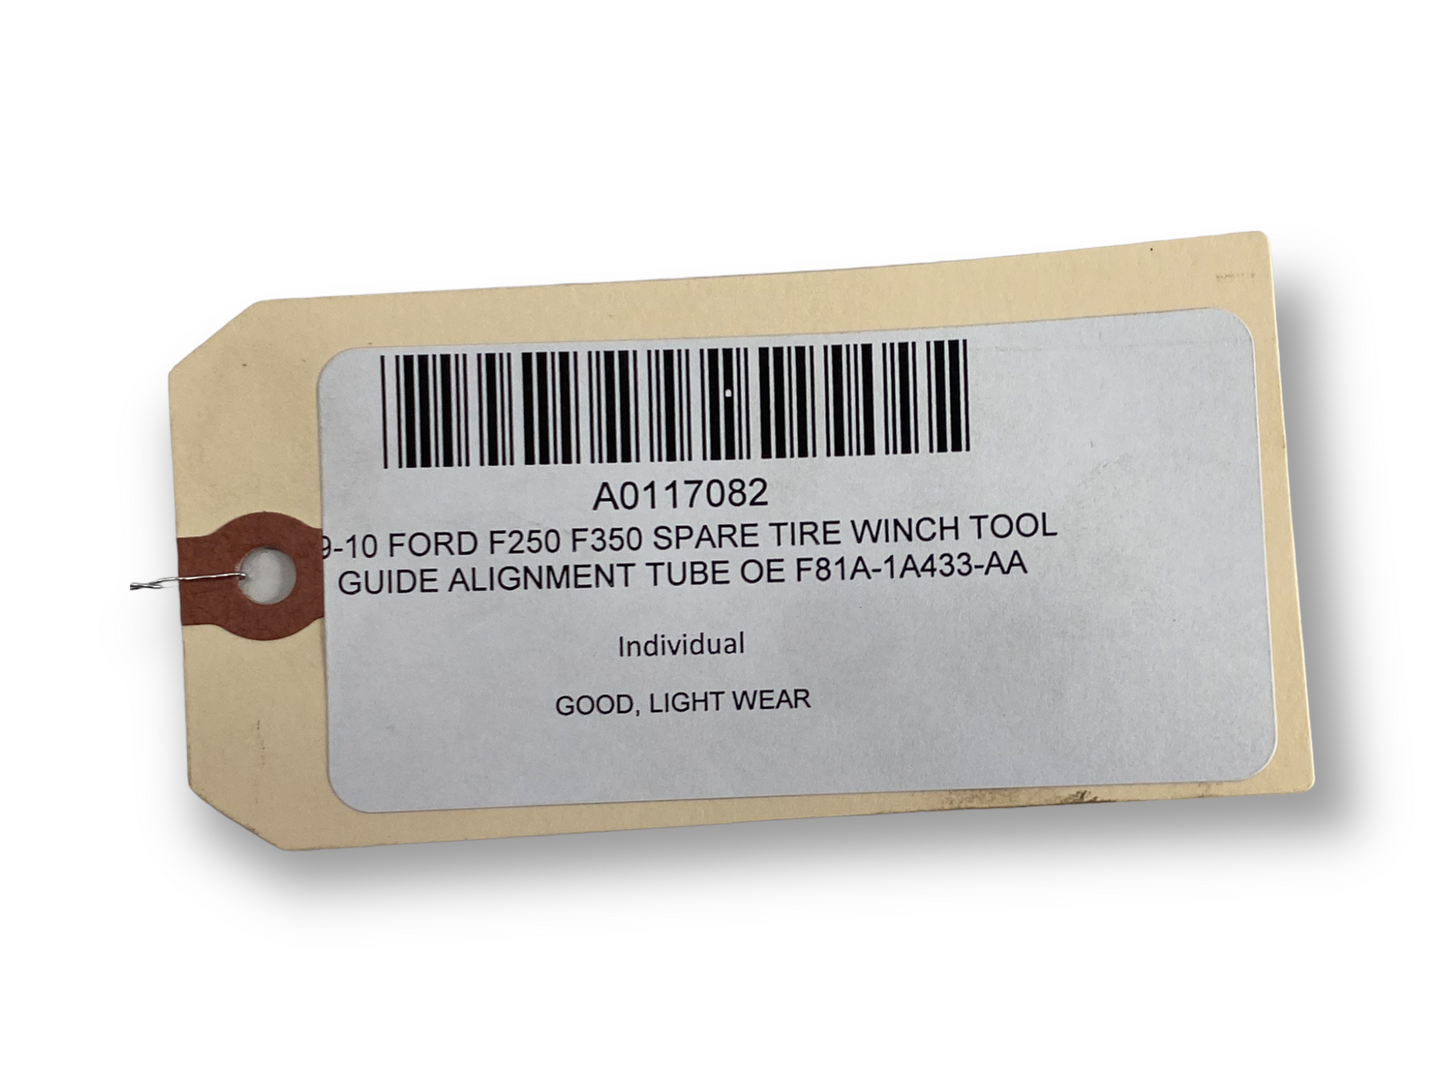 99-10 Ford F250 F350 Spare Tire Winch Tool Guide Alignment Tube OE F81A-1A433-AA